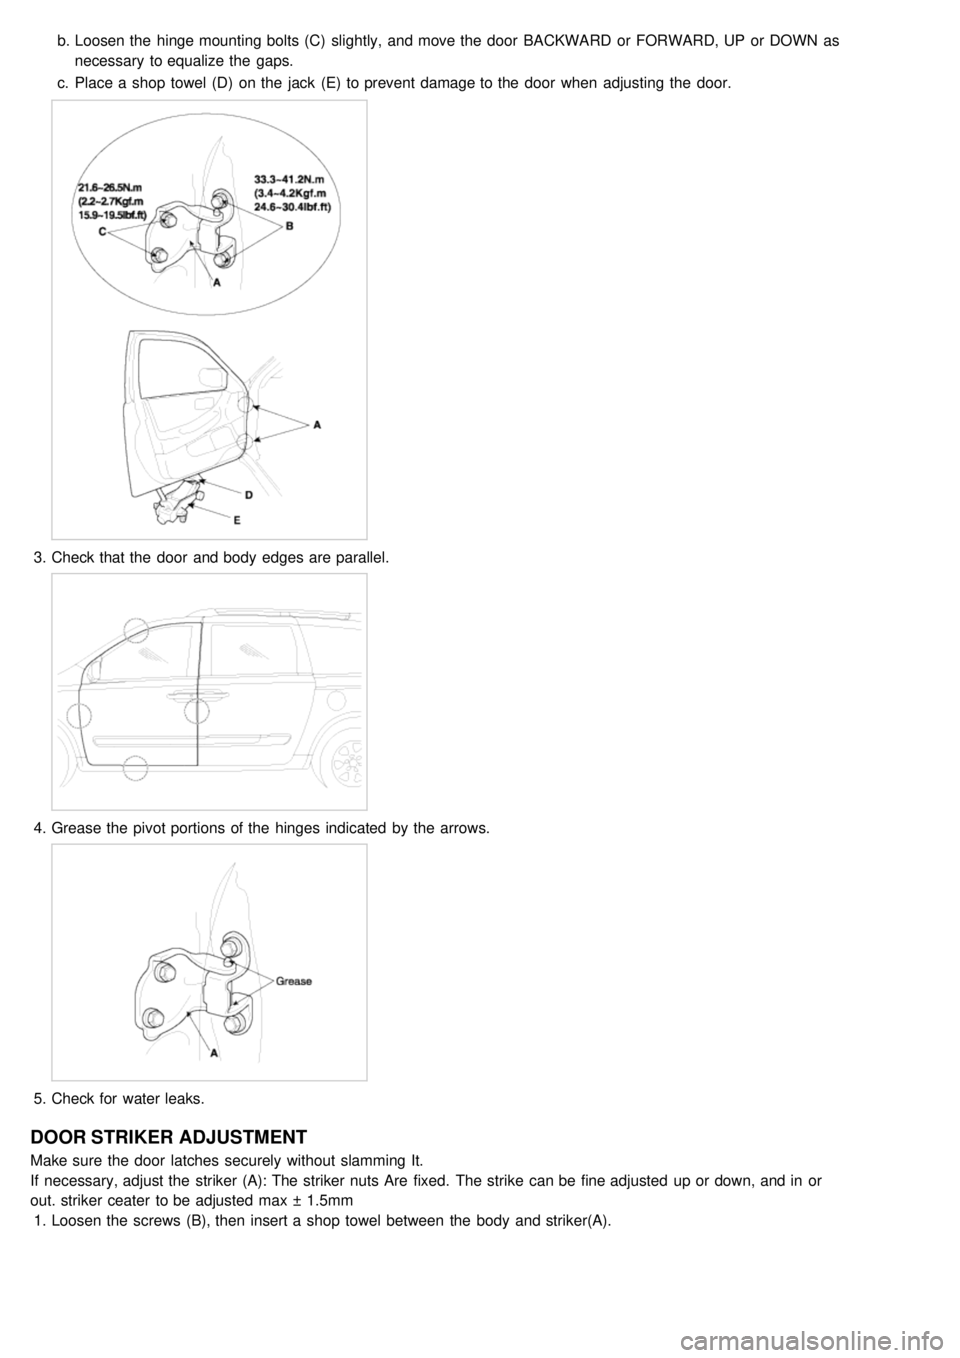 KIA CARNIVAL 2007  Workshop Manual b.Loosen the  hinge mounting bolts (C)  slightly, and move the  door  BACKWARD  or FORWARD, UP  or DOWN  as
necessary  to equalize the  gaps.
c. Place a  shop  towel (D)  on the  jack  (E)  to prevent